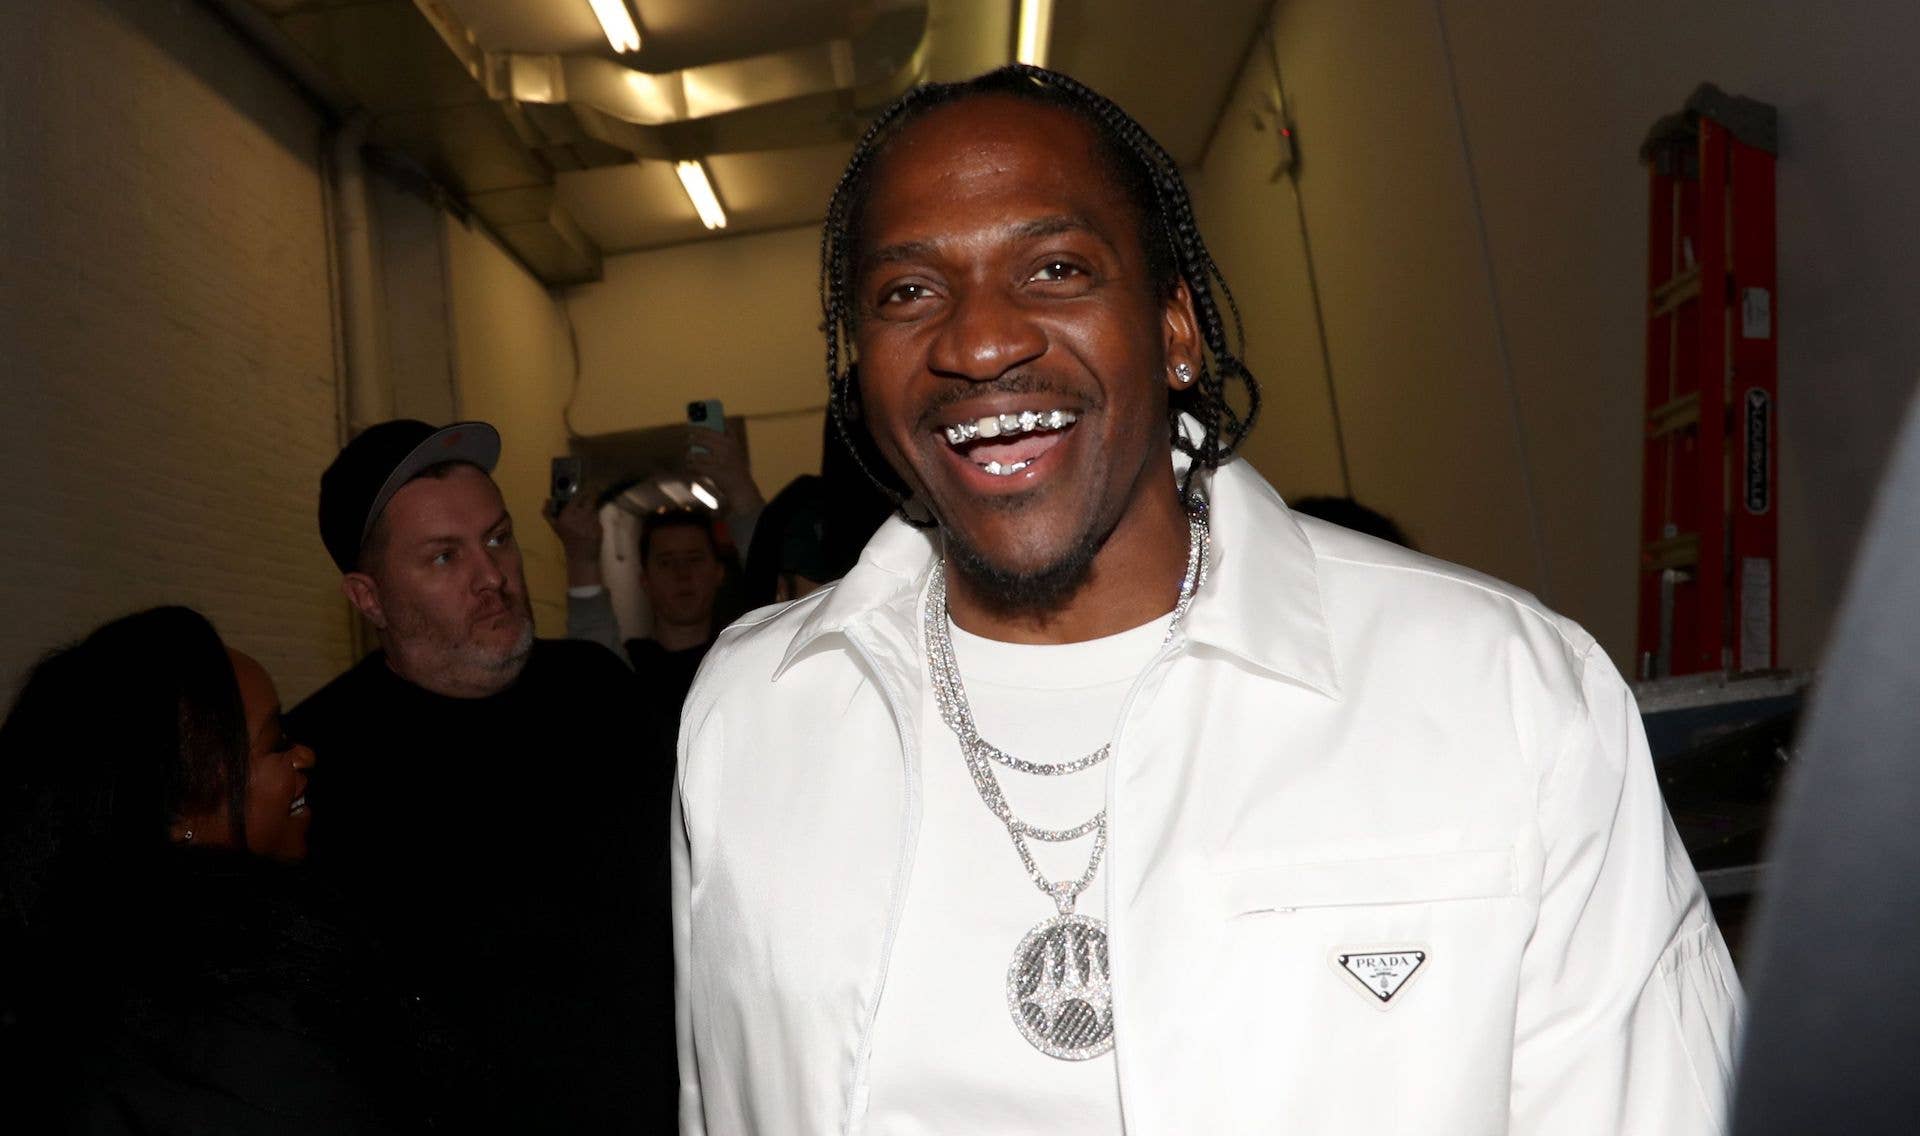 Pusha T Wearing Grills, Prada, and a Chain and his listening party.